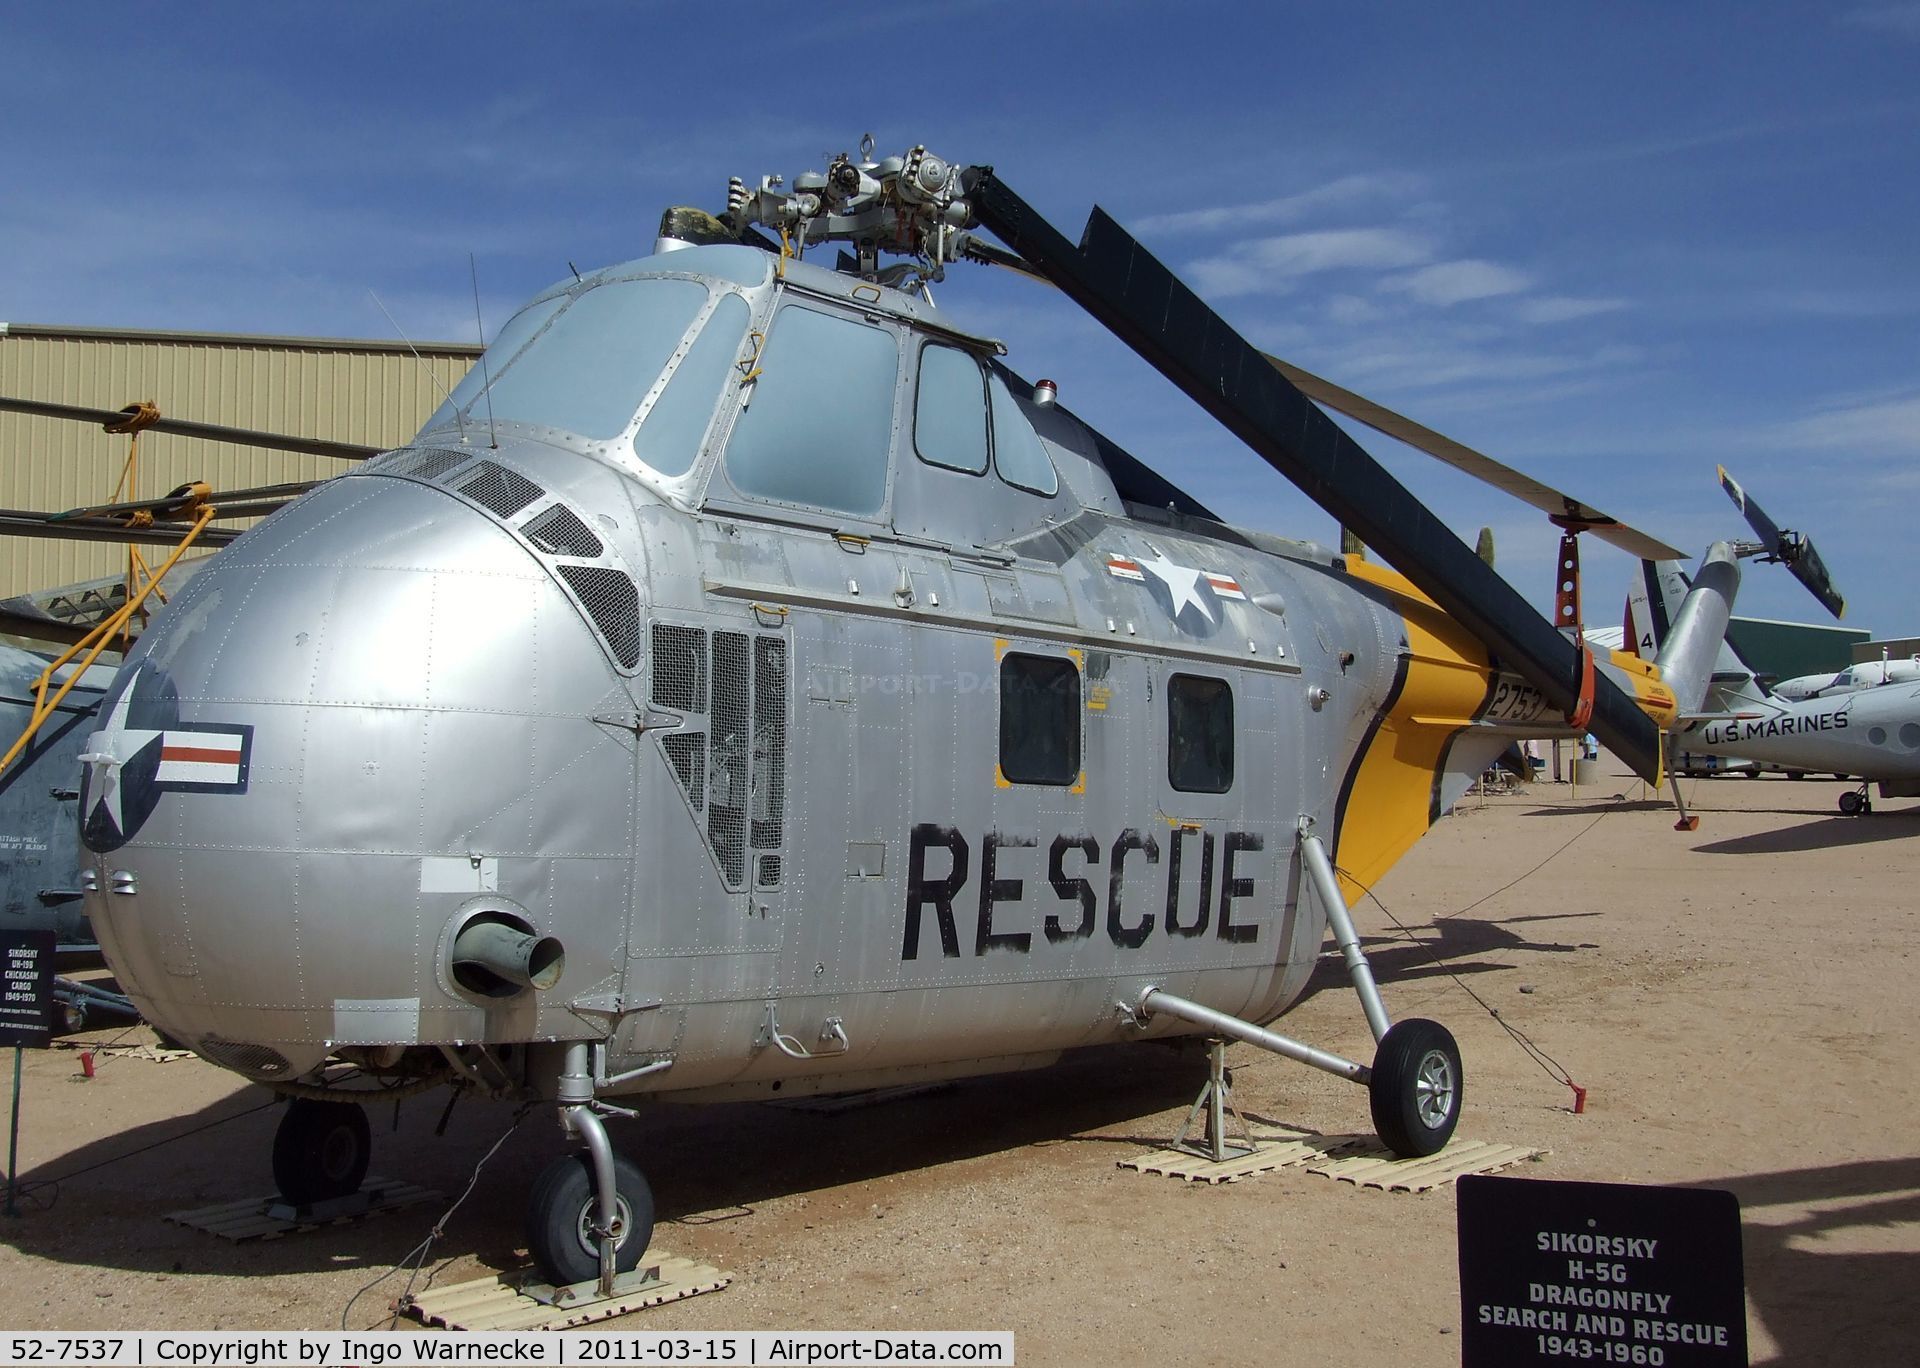 52-7537, 1952 Sikorsky UH-19B Chickasaw C/N 55-640, Sikorsky UH-19B Chickasaw at the Pima Air & Space Museum, Tucson AZ